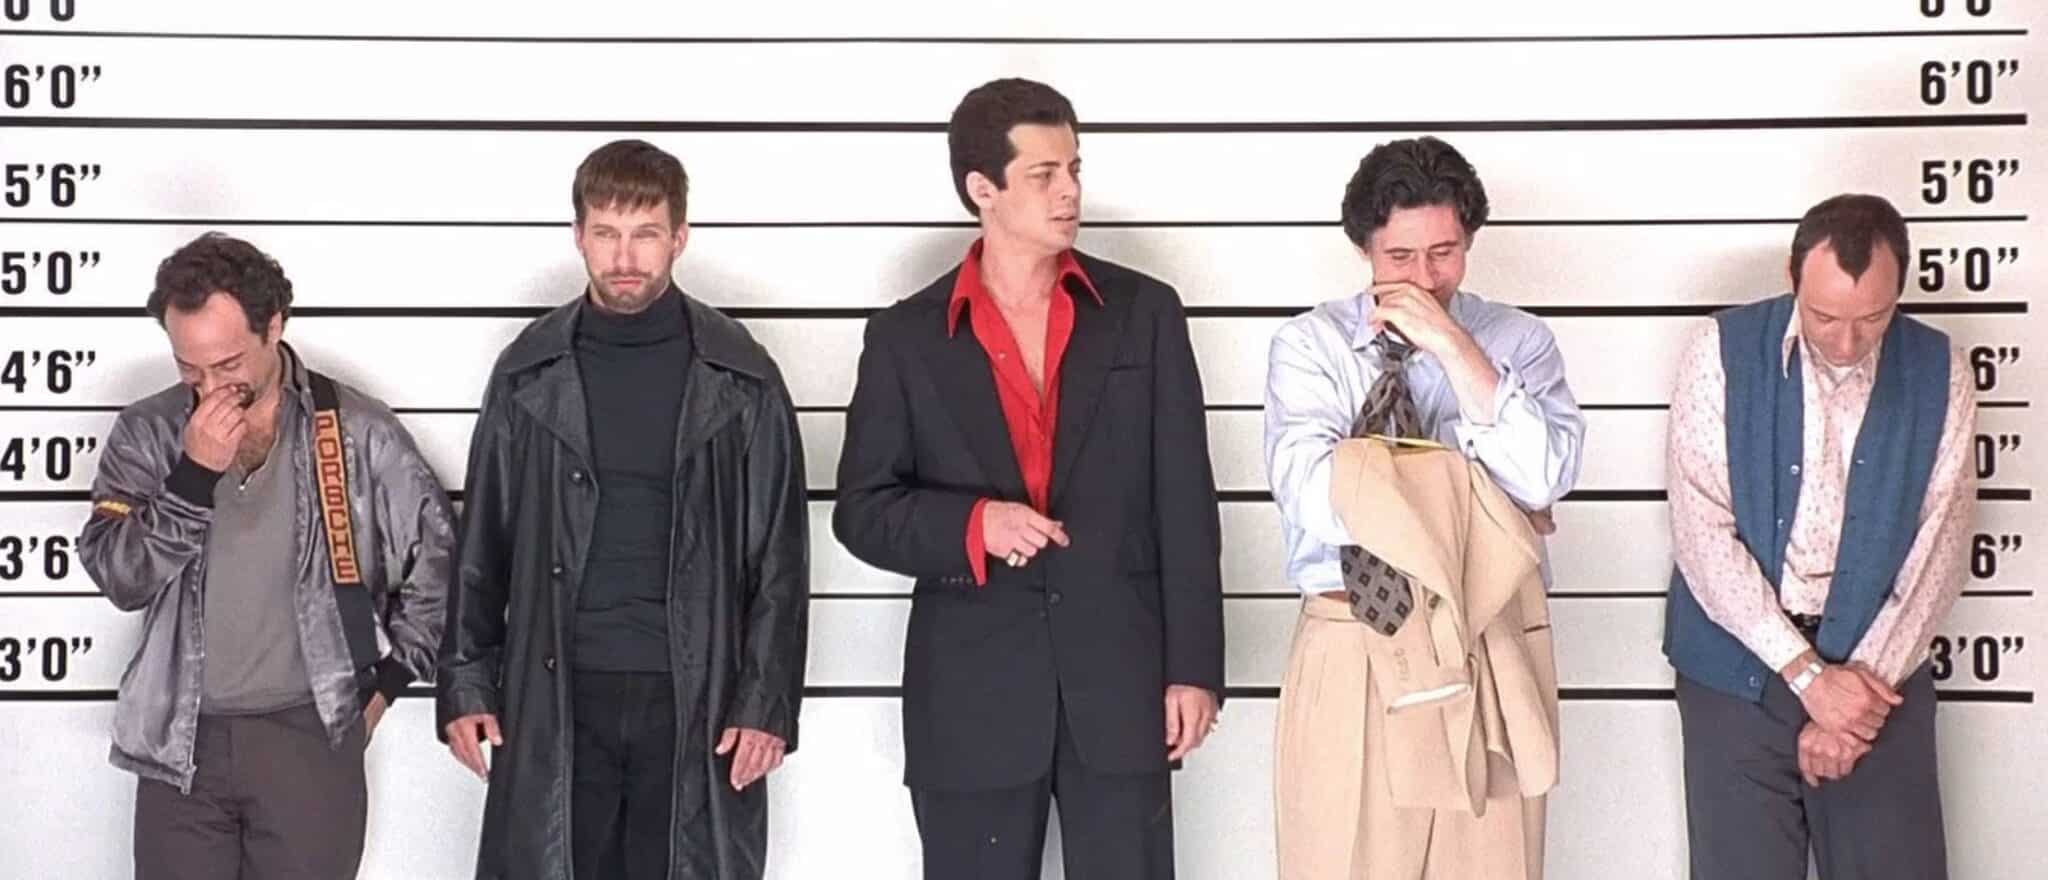 Kevin Spacey, Stephen Baldwin, Gabriel Byrne, Benicio Del Toro, and Kevin Pollak in The Usual Suspects (1995)